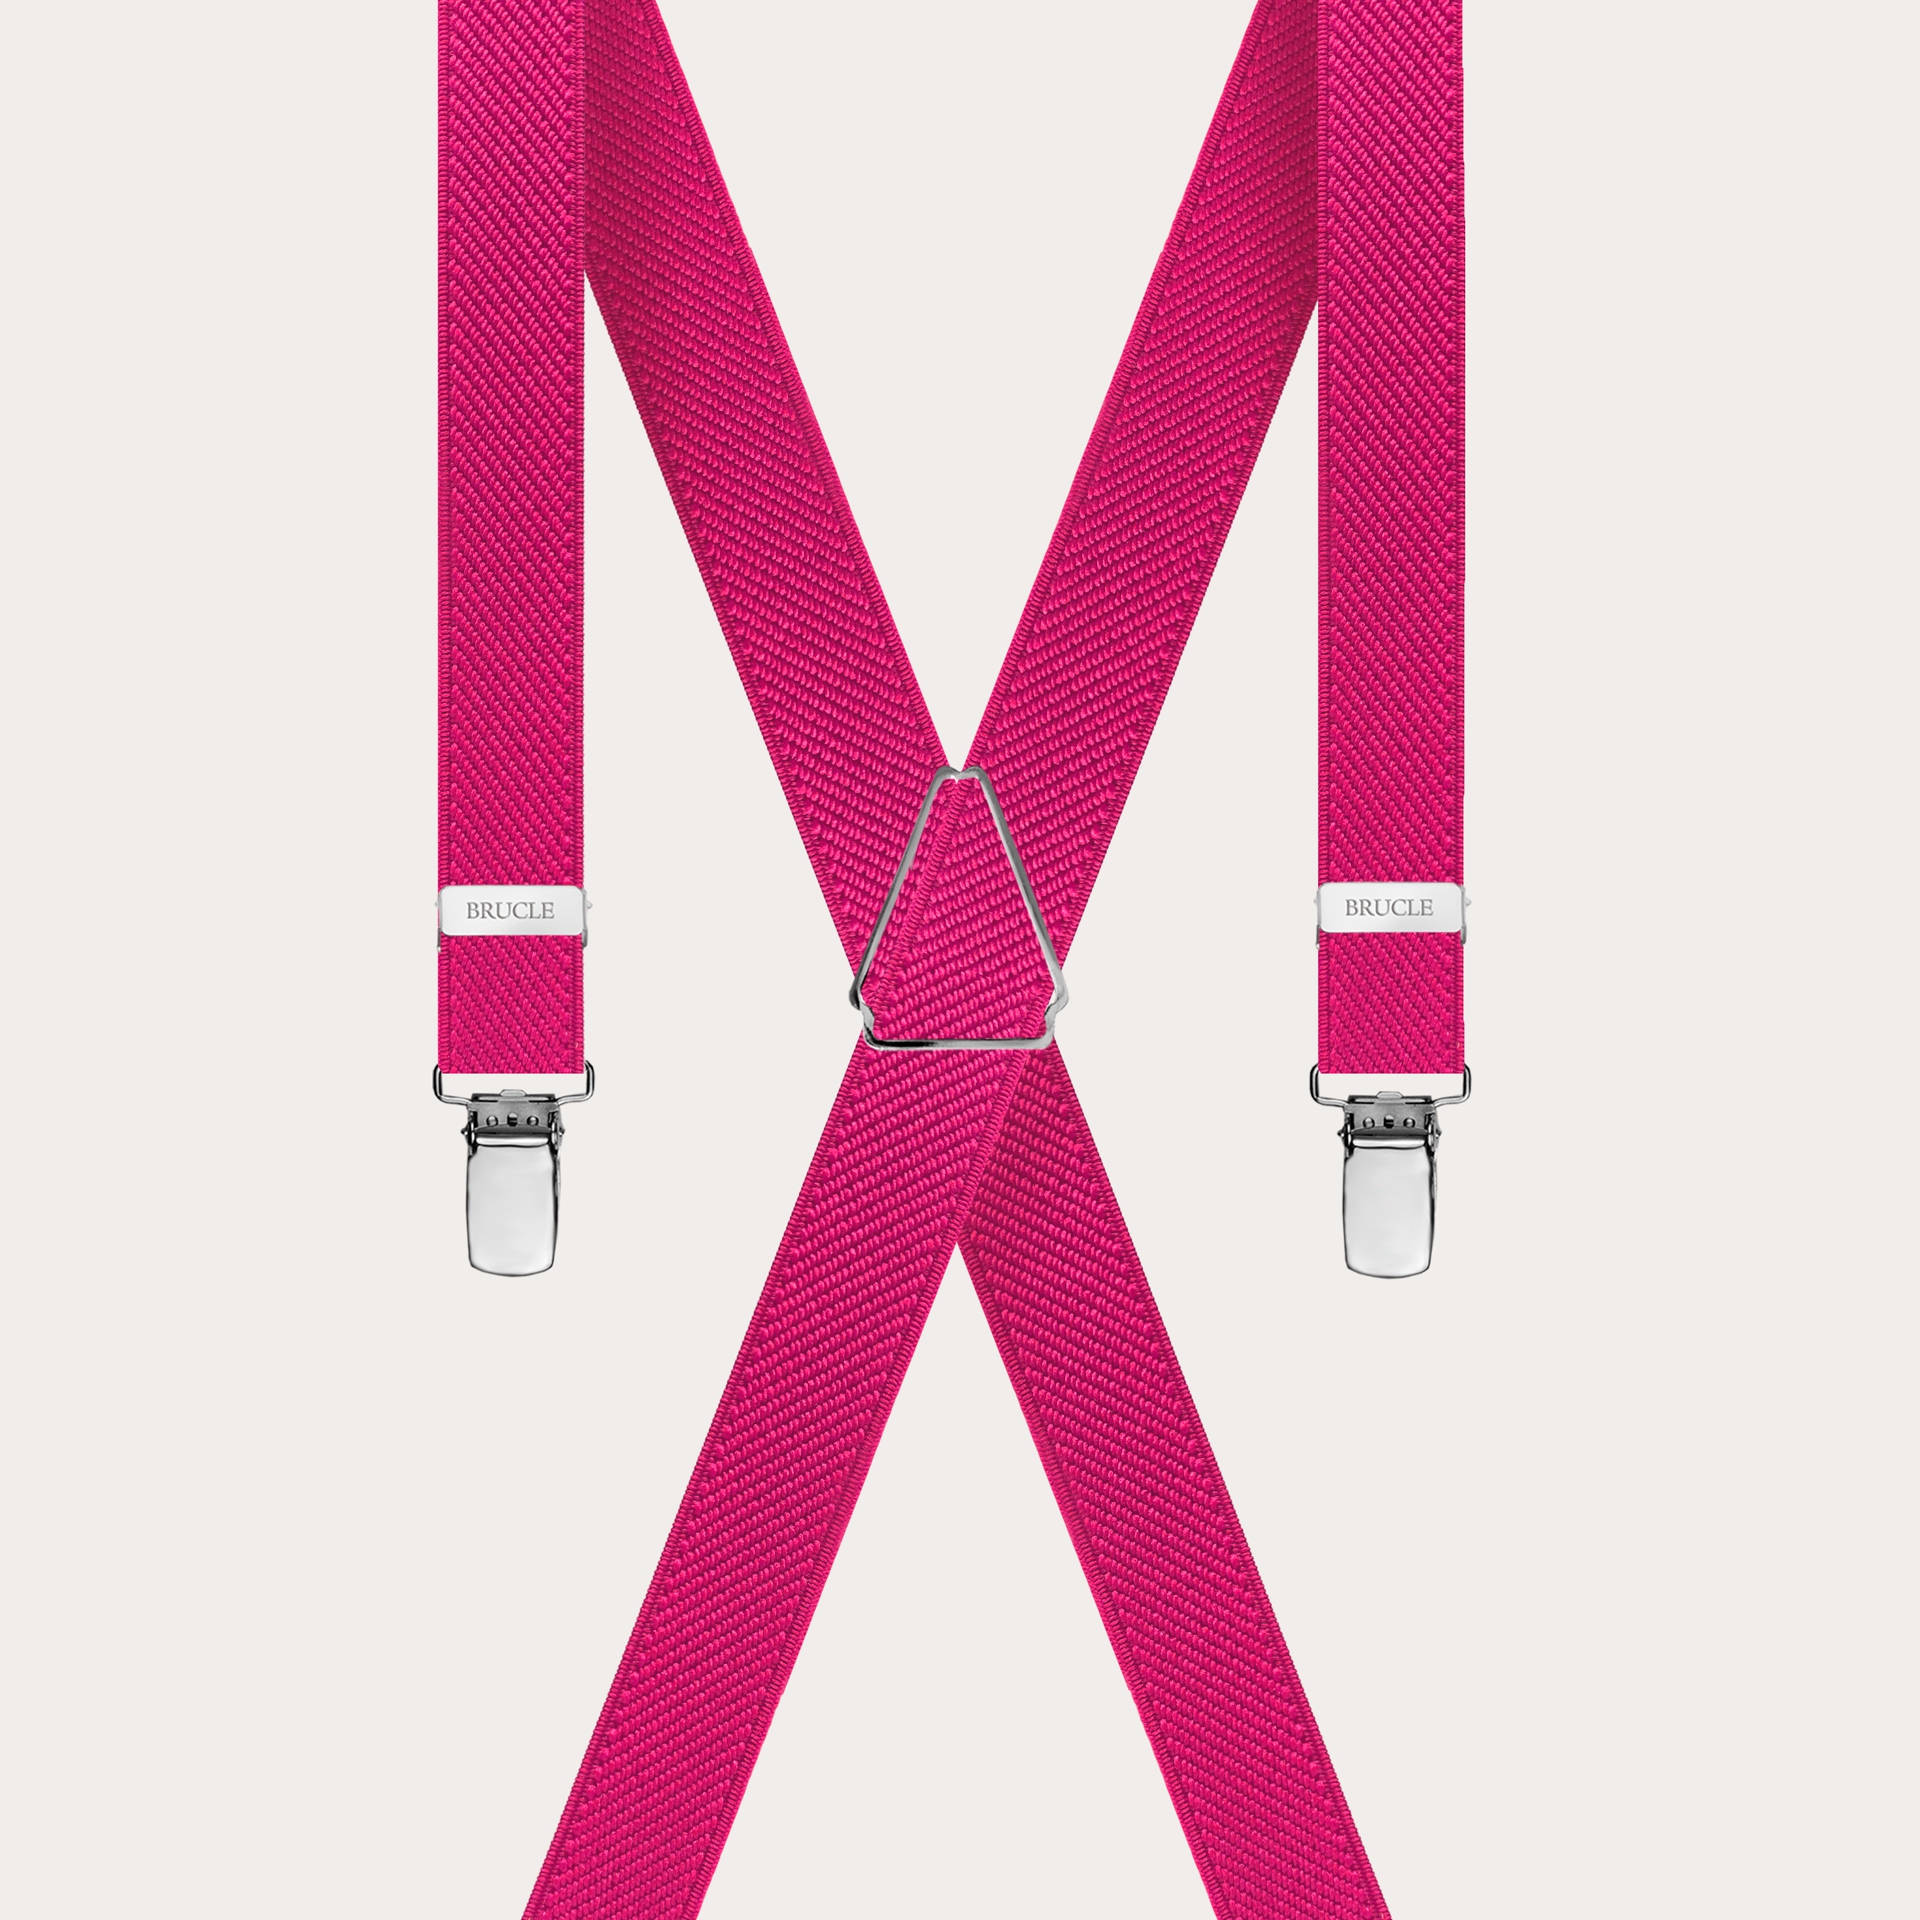 BRUCLE X-shaped suspenders for boys and girls